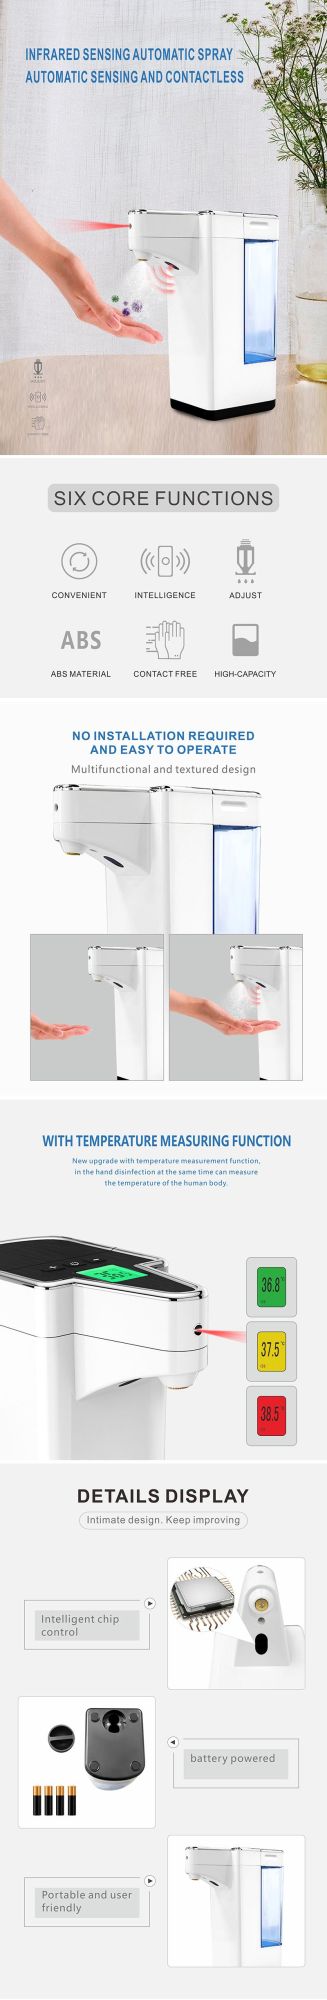 CE Certification, Digital Display, High Sensitivity, Fast Reading, Touch-Free Smart Thermometer, Hand Sanitizer Dispenser, Soap Dispenser